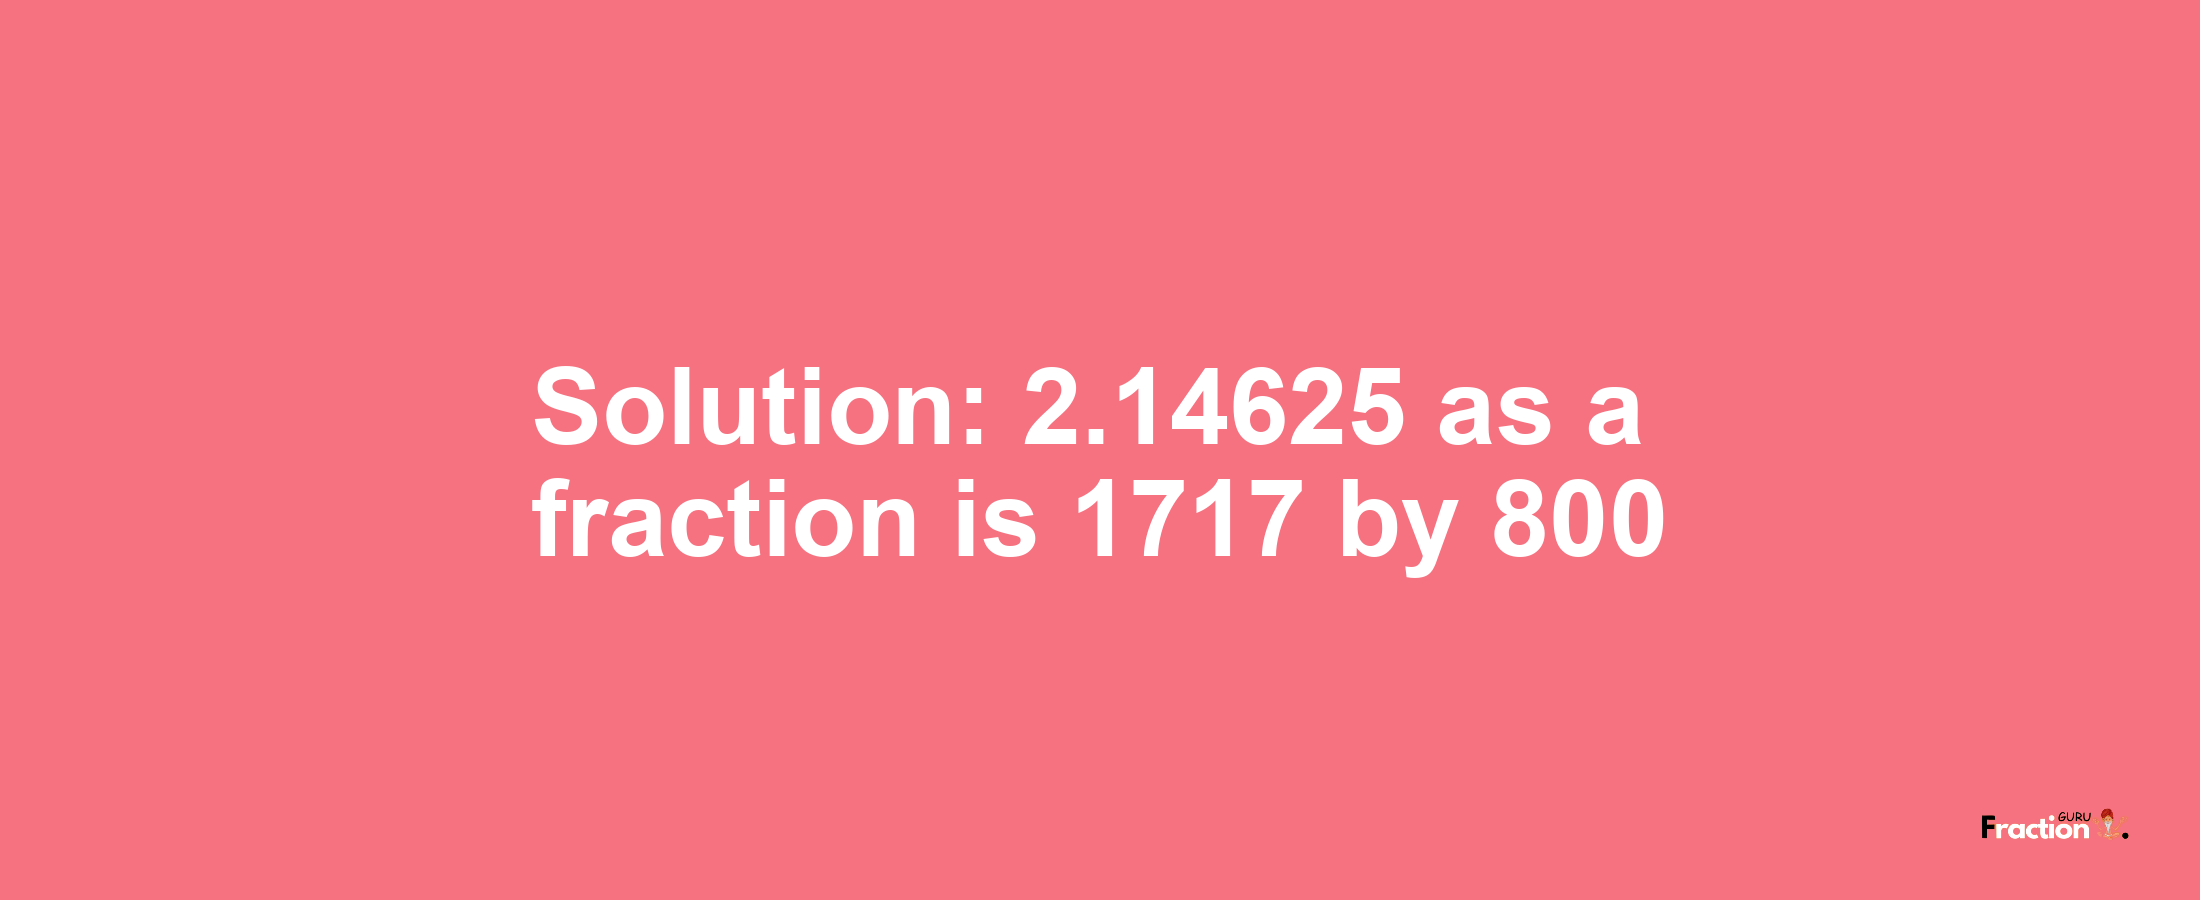 Solution:2.14625 as a fraction is 1717/800